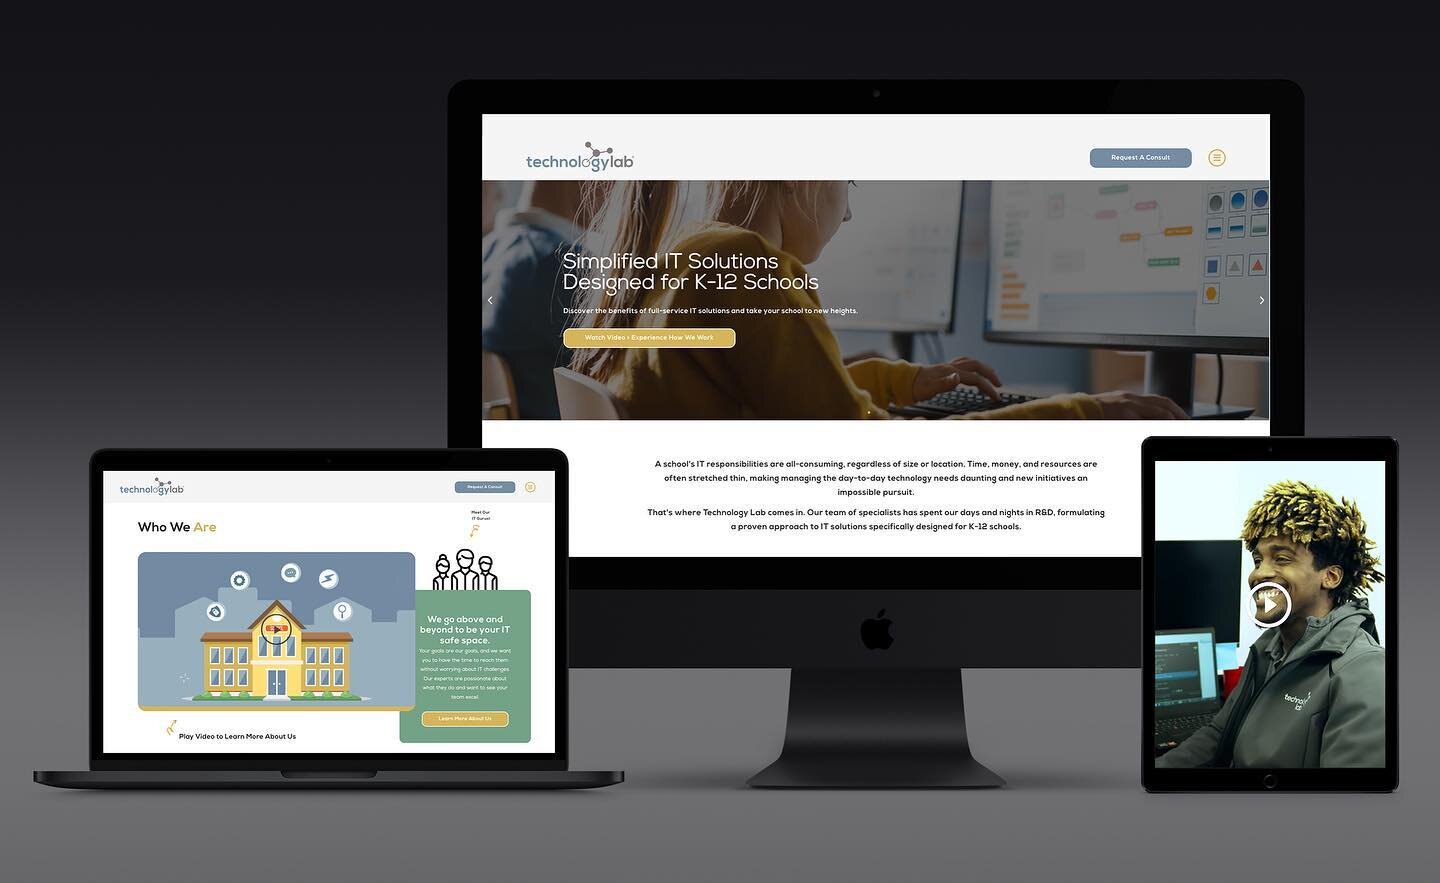 New site 🚀 #TechnologyLab! BIG thanks to our strategic partners @clvrcreative and @borobusinesslab + stellar video work by @renaissancemarketing and @nuclearfish 👏 #webdesign #thursdaymotivation 

If you&rsquo;re a K-12 school looking for managed I